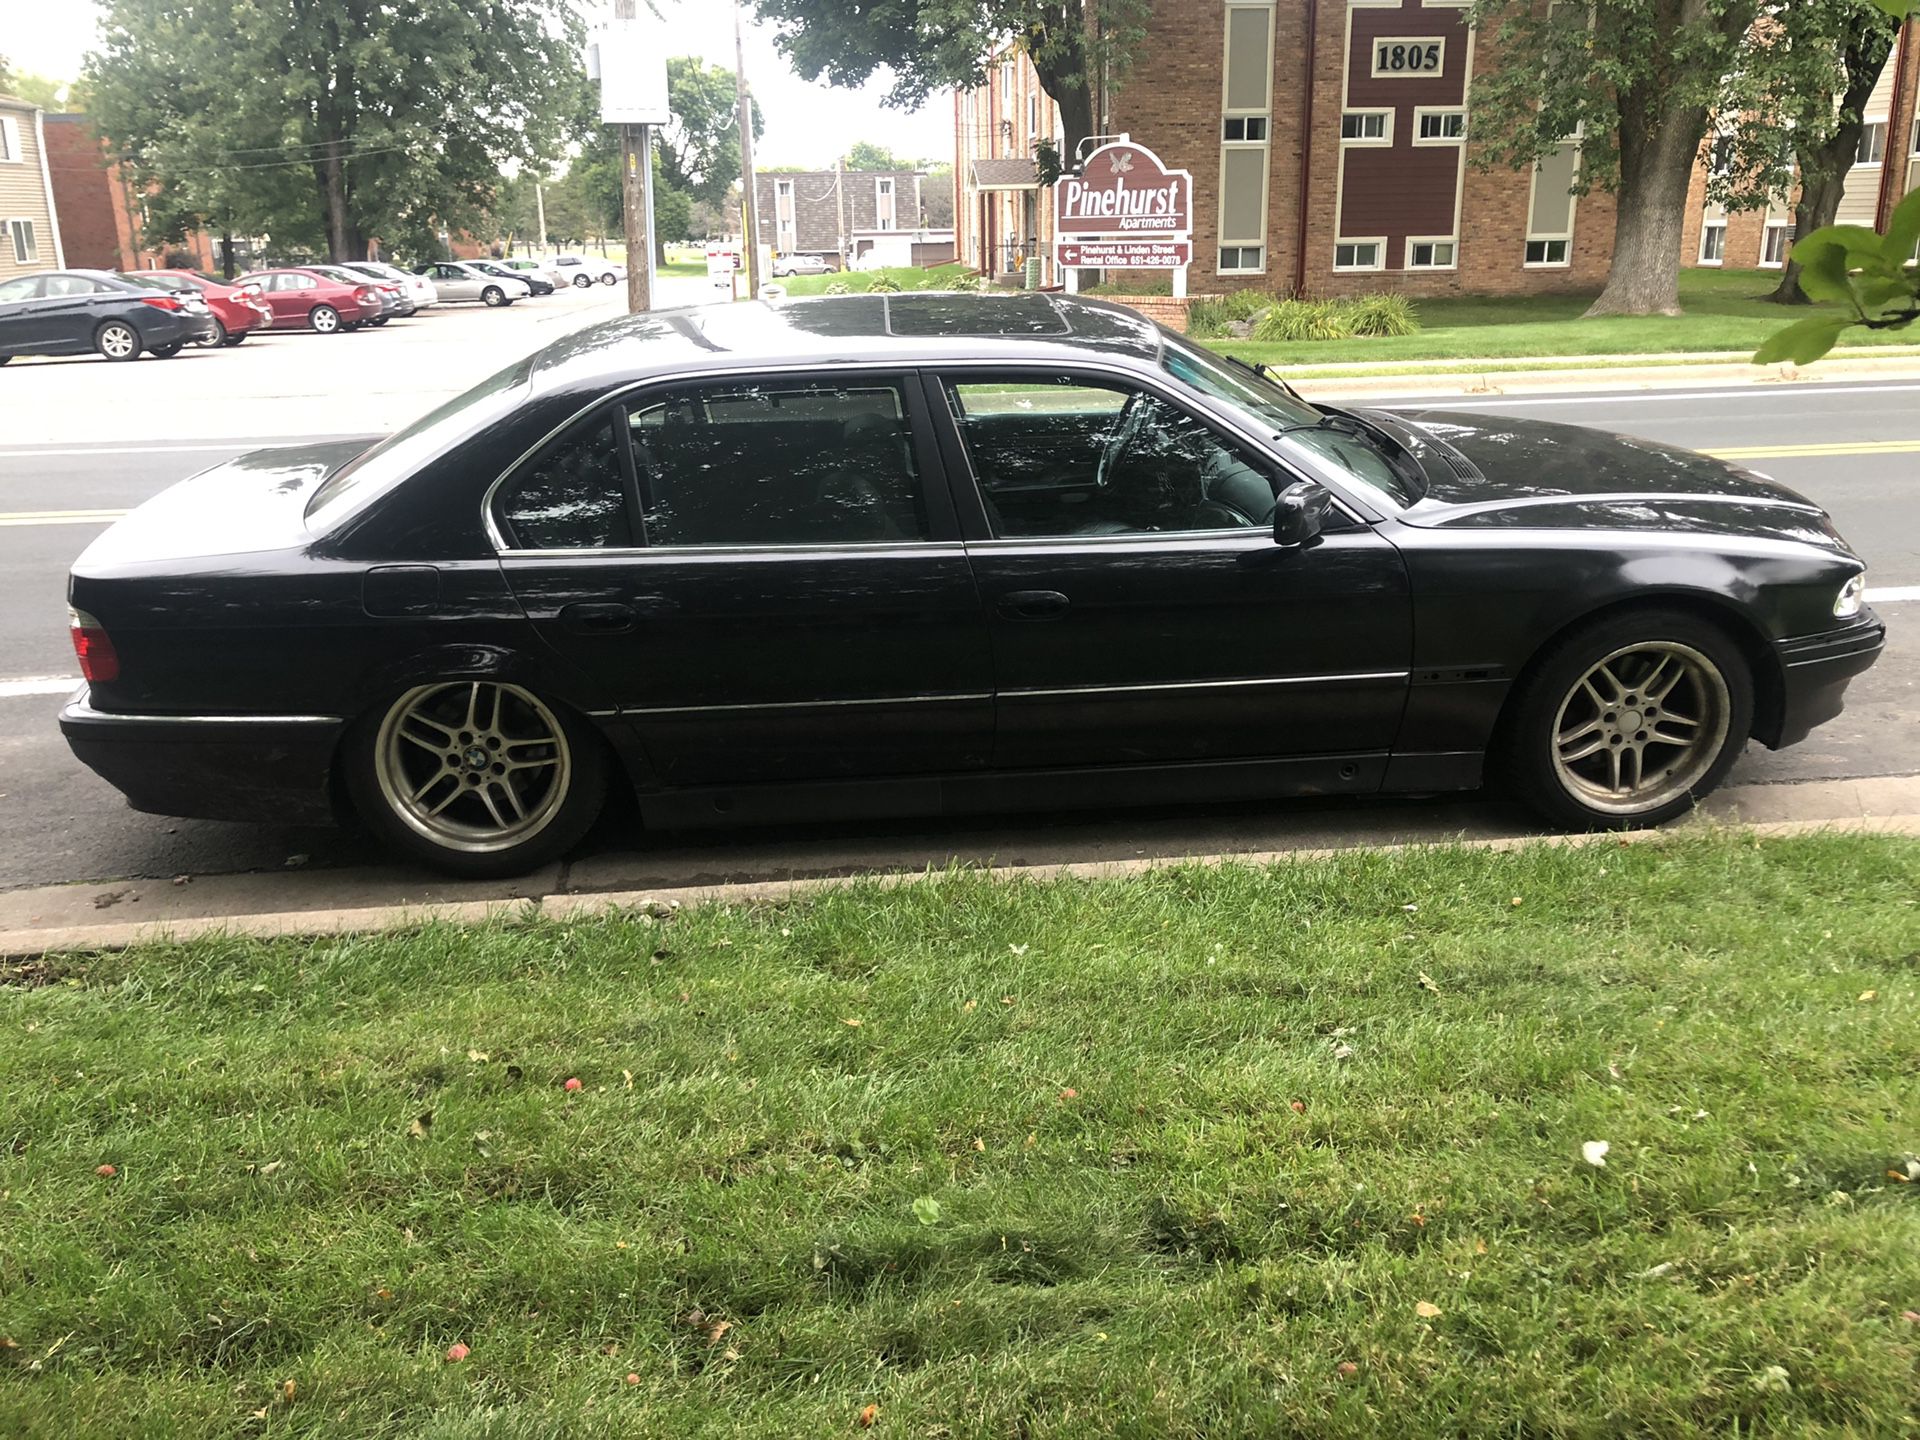 97 bmw 740il for sale for parts or buy the whole thing for 1000 or best offer